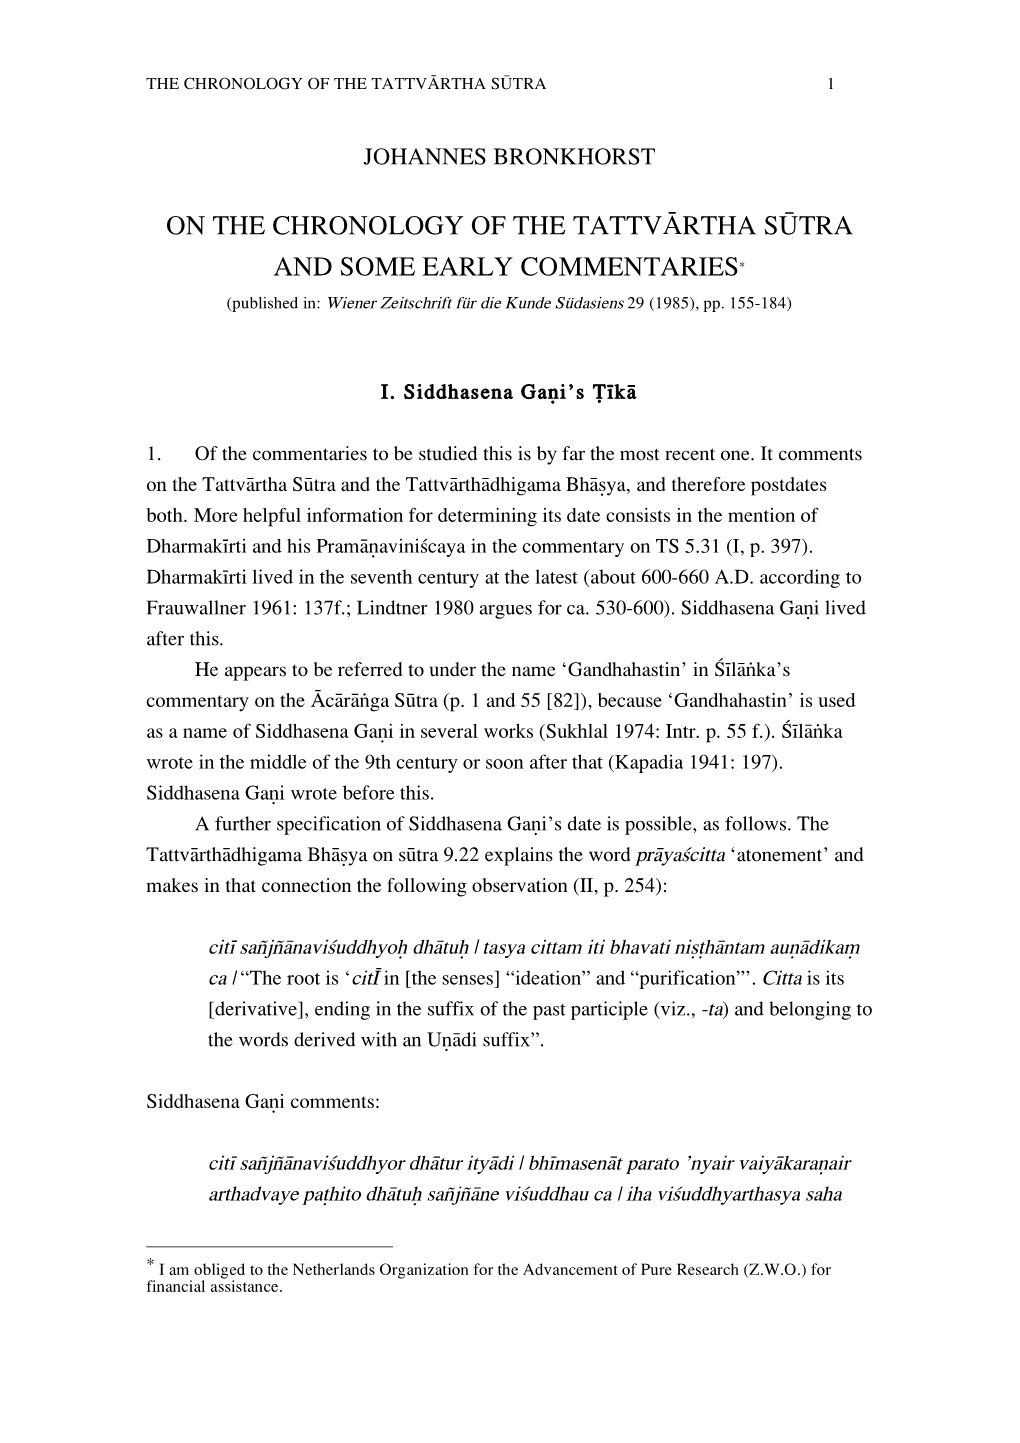 ON the CHRONOLOGY of the TATTVÓRTHA SÚTRA and SOME EARLY COMMENTARIES* (Published In: Wiener Zeitschrift Für Die Kunde Südasiens 29 (1985), Pp